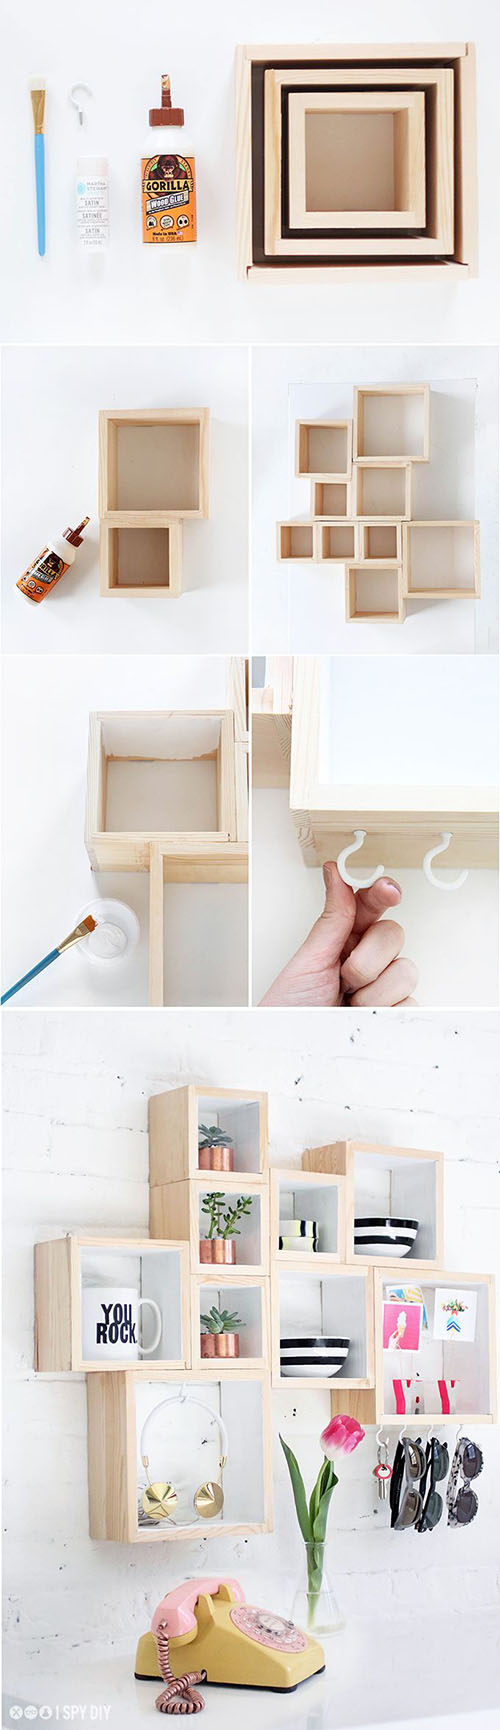 12  Out-the-door Box Storage41782